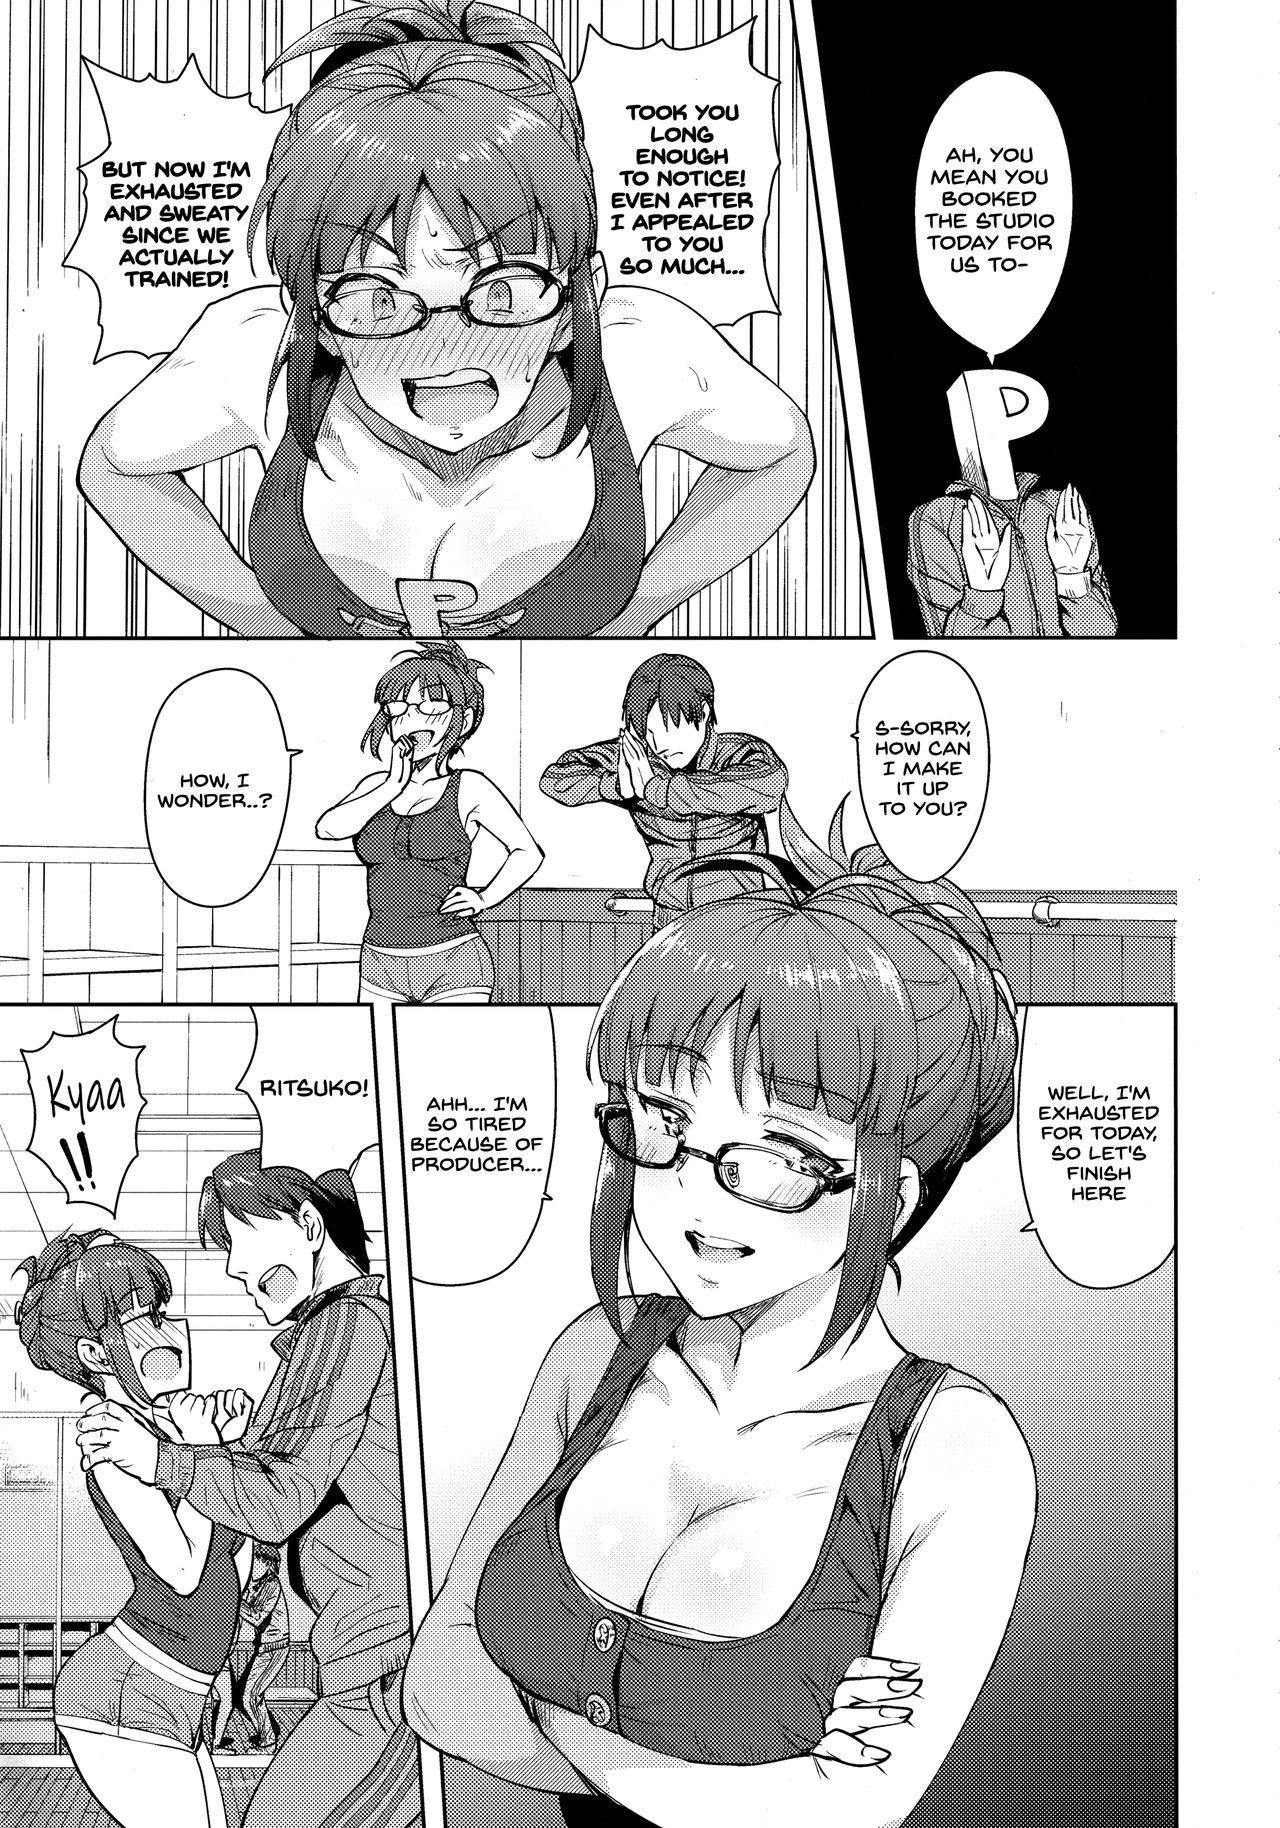 Cunt Ritsuko to Stretch! - The idolmaster Humiliation Pov - Page 4